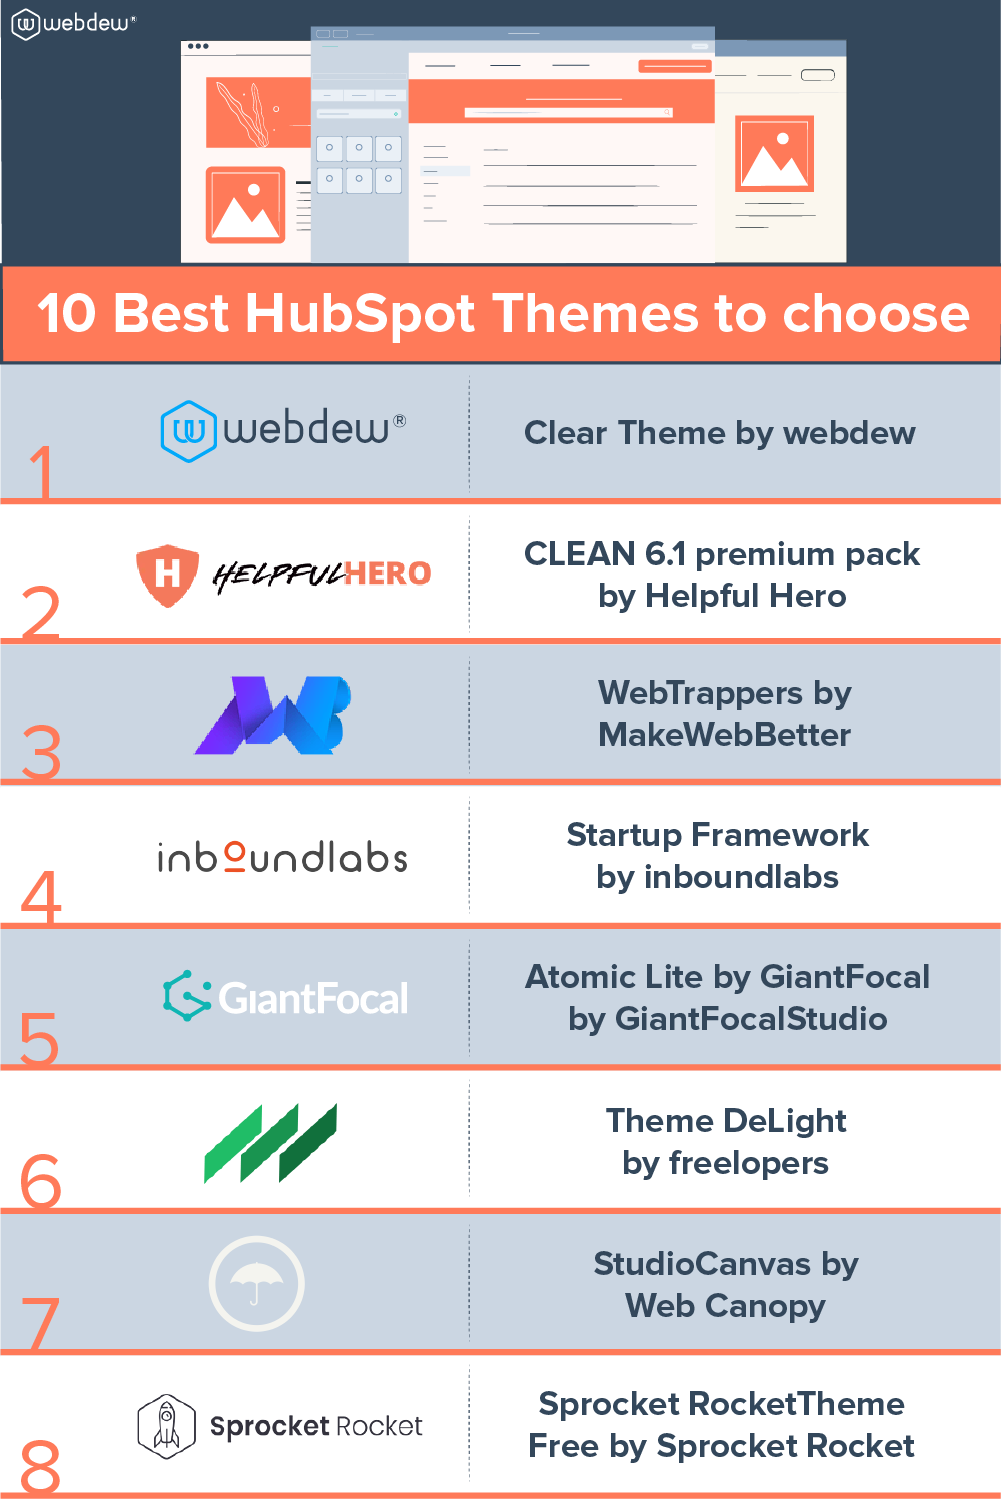 10-best-hubspot-themes-to-choose-from